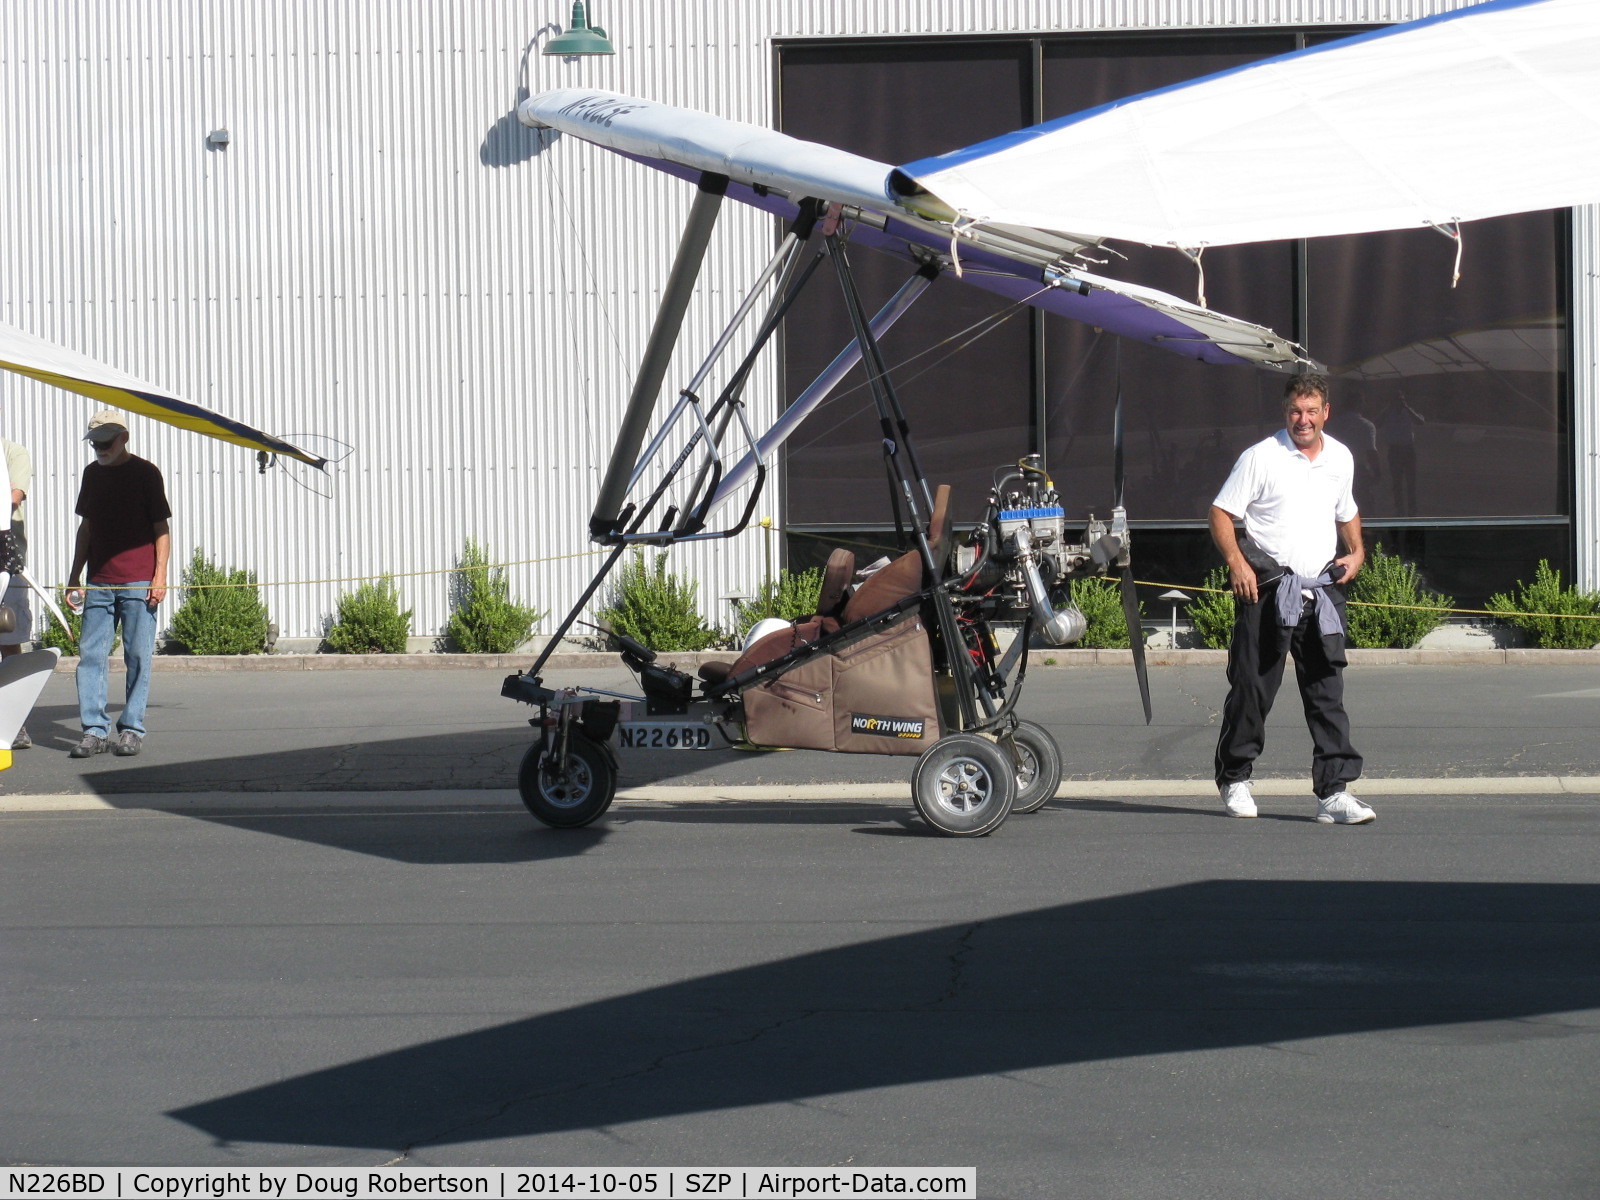 N226BD, North Wing Apache ST C/N 2261107, 2008 North Wing Design APACHE ST, weight-shift control ultralight trike, Rotax 582 pusher